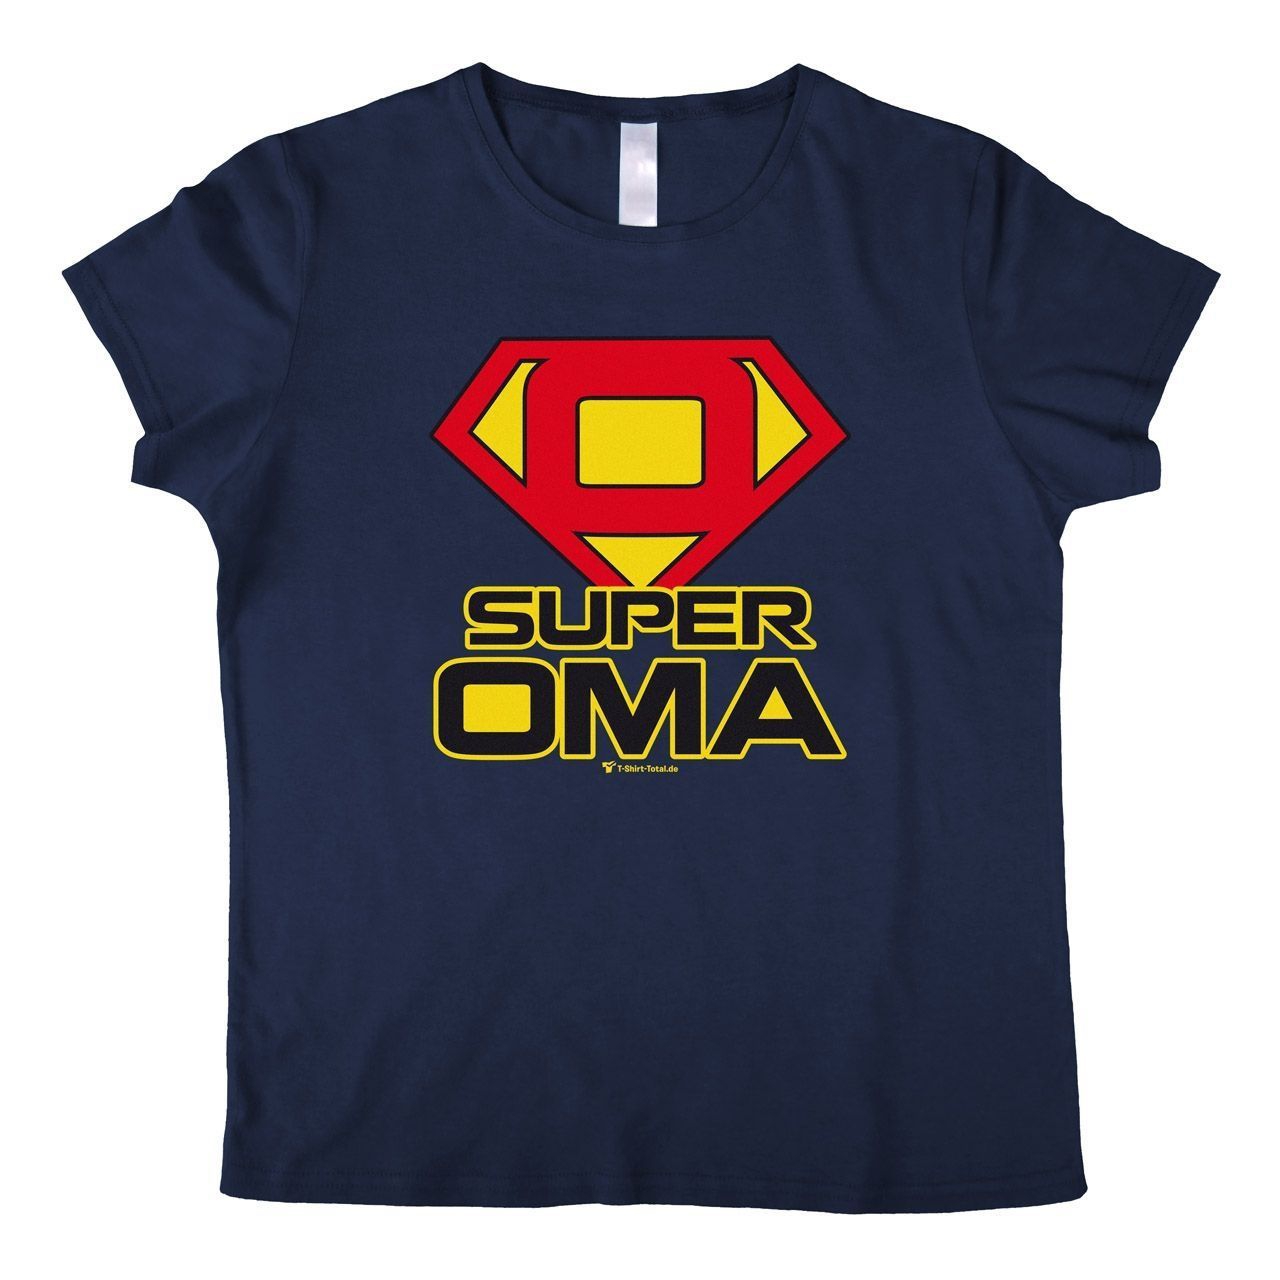 Super Oma Woman T-Shirt navy Extra Large